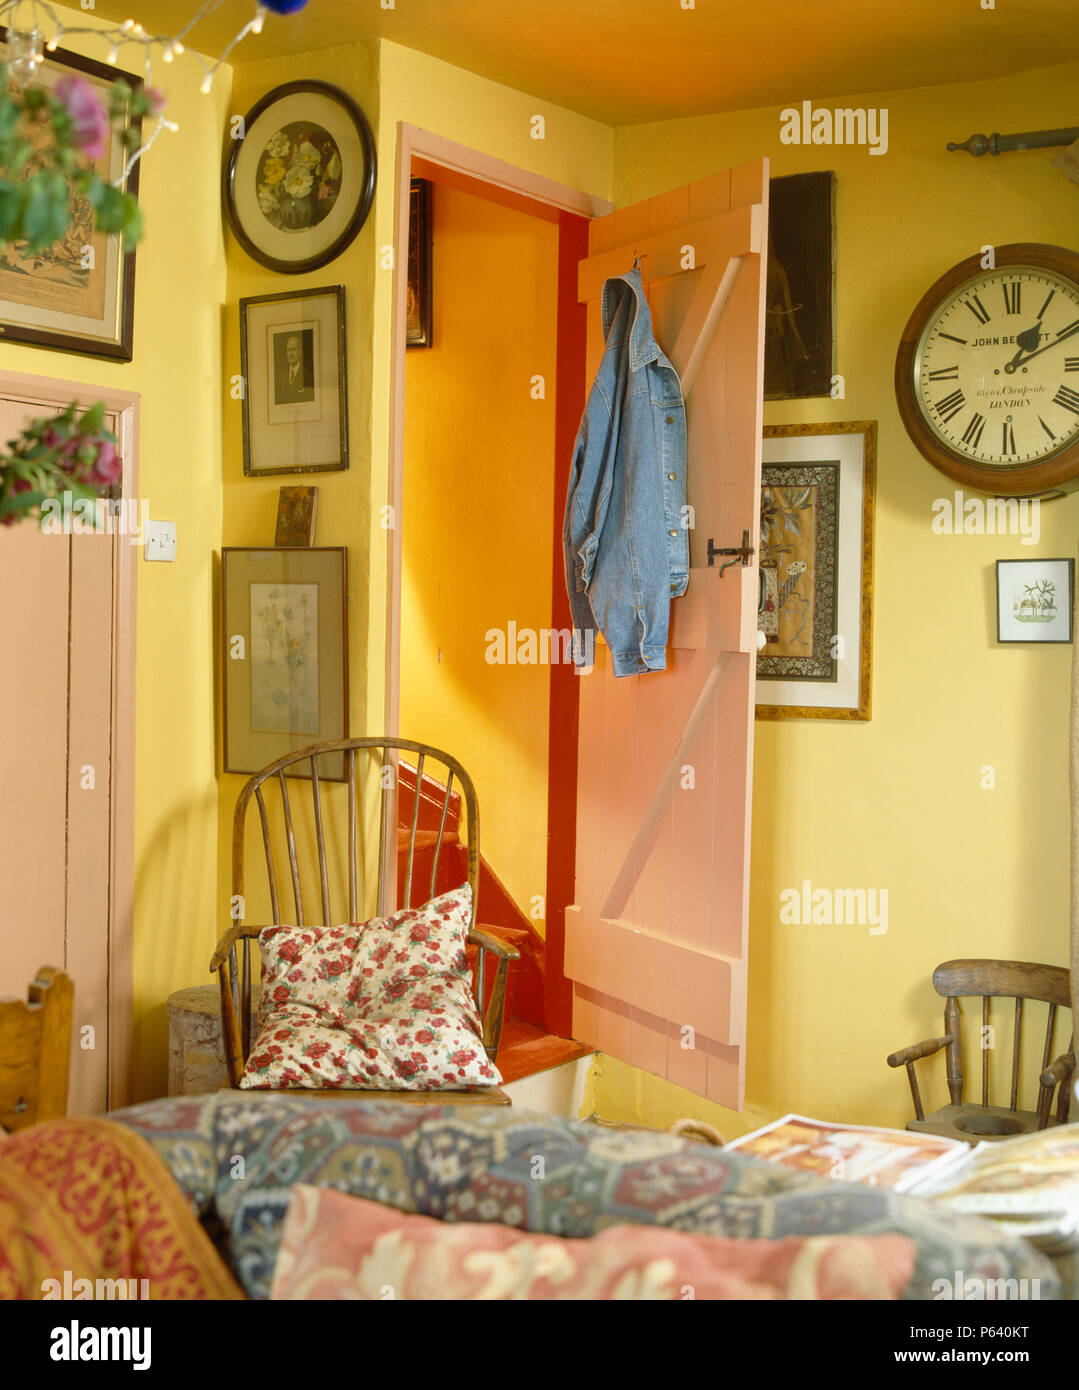 Vintage Clock And Pictures On Walls Of Yellow Economy Style